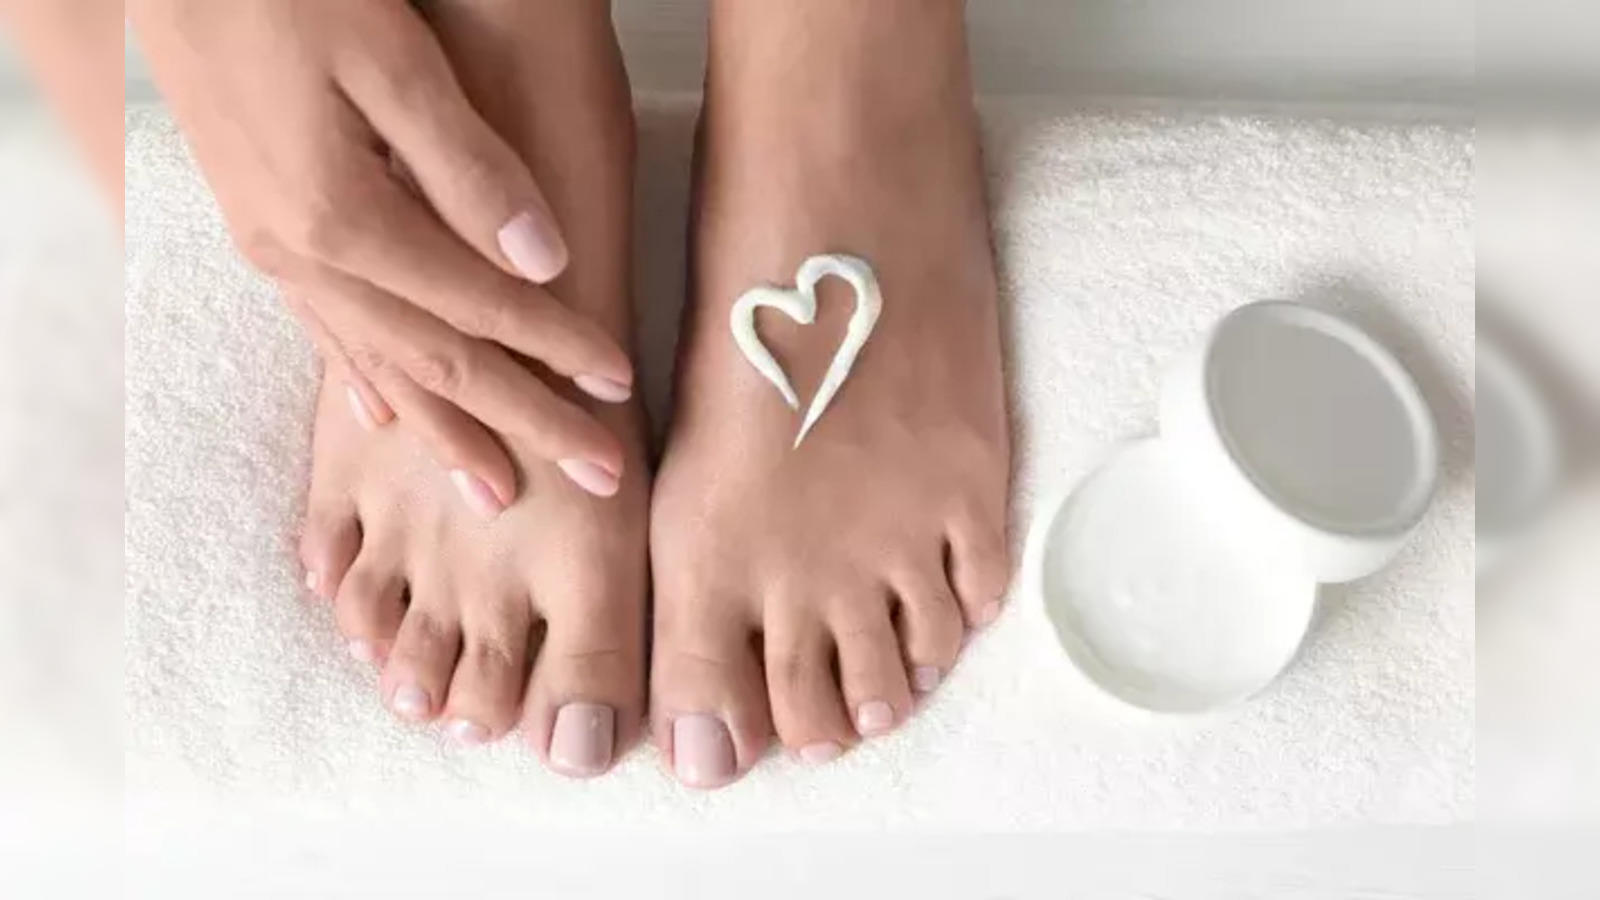 Foot Cream For Dry Cracked Heels Anti-drying Feet Cream 23g Refreshed Foot  Moisturizer Cream For Dry Cracked Feet Hands Heels - AliExpress